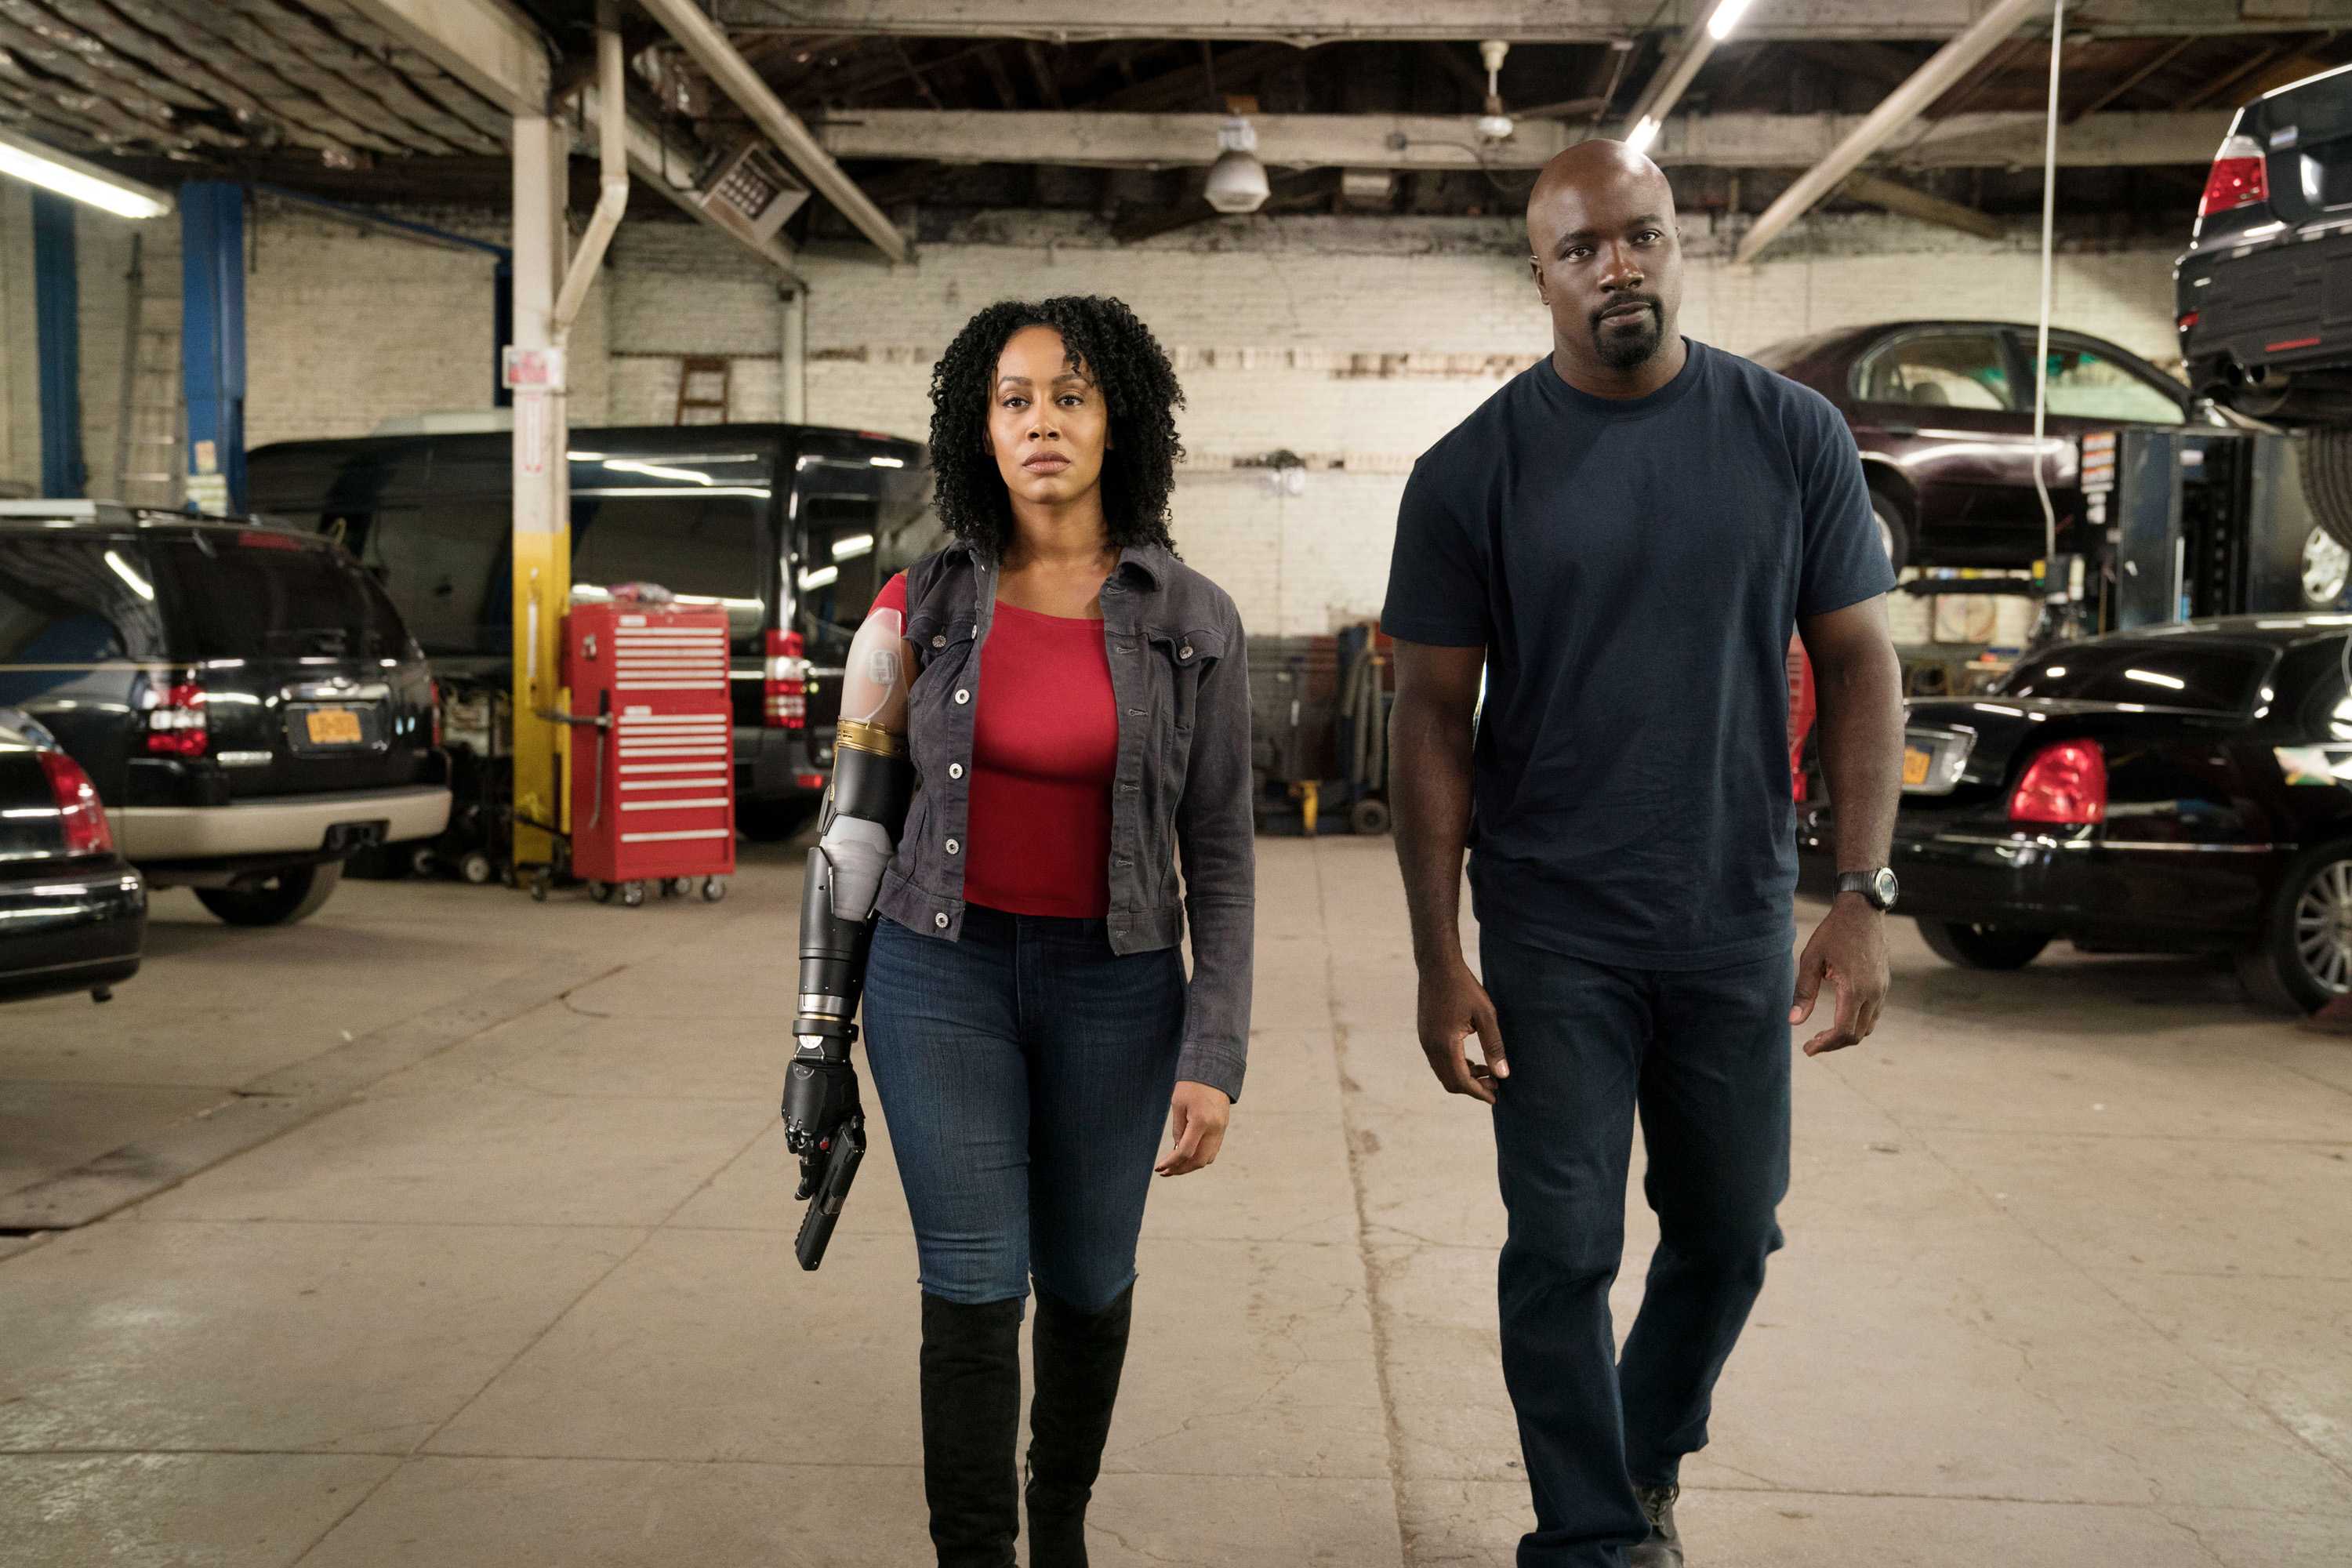 Simone Missick, playing as Misty Knight, and Mike Colter, playing Luke Cage, walking in an autoworkshop.